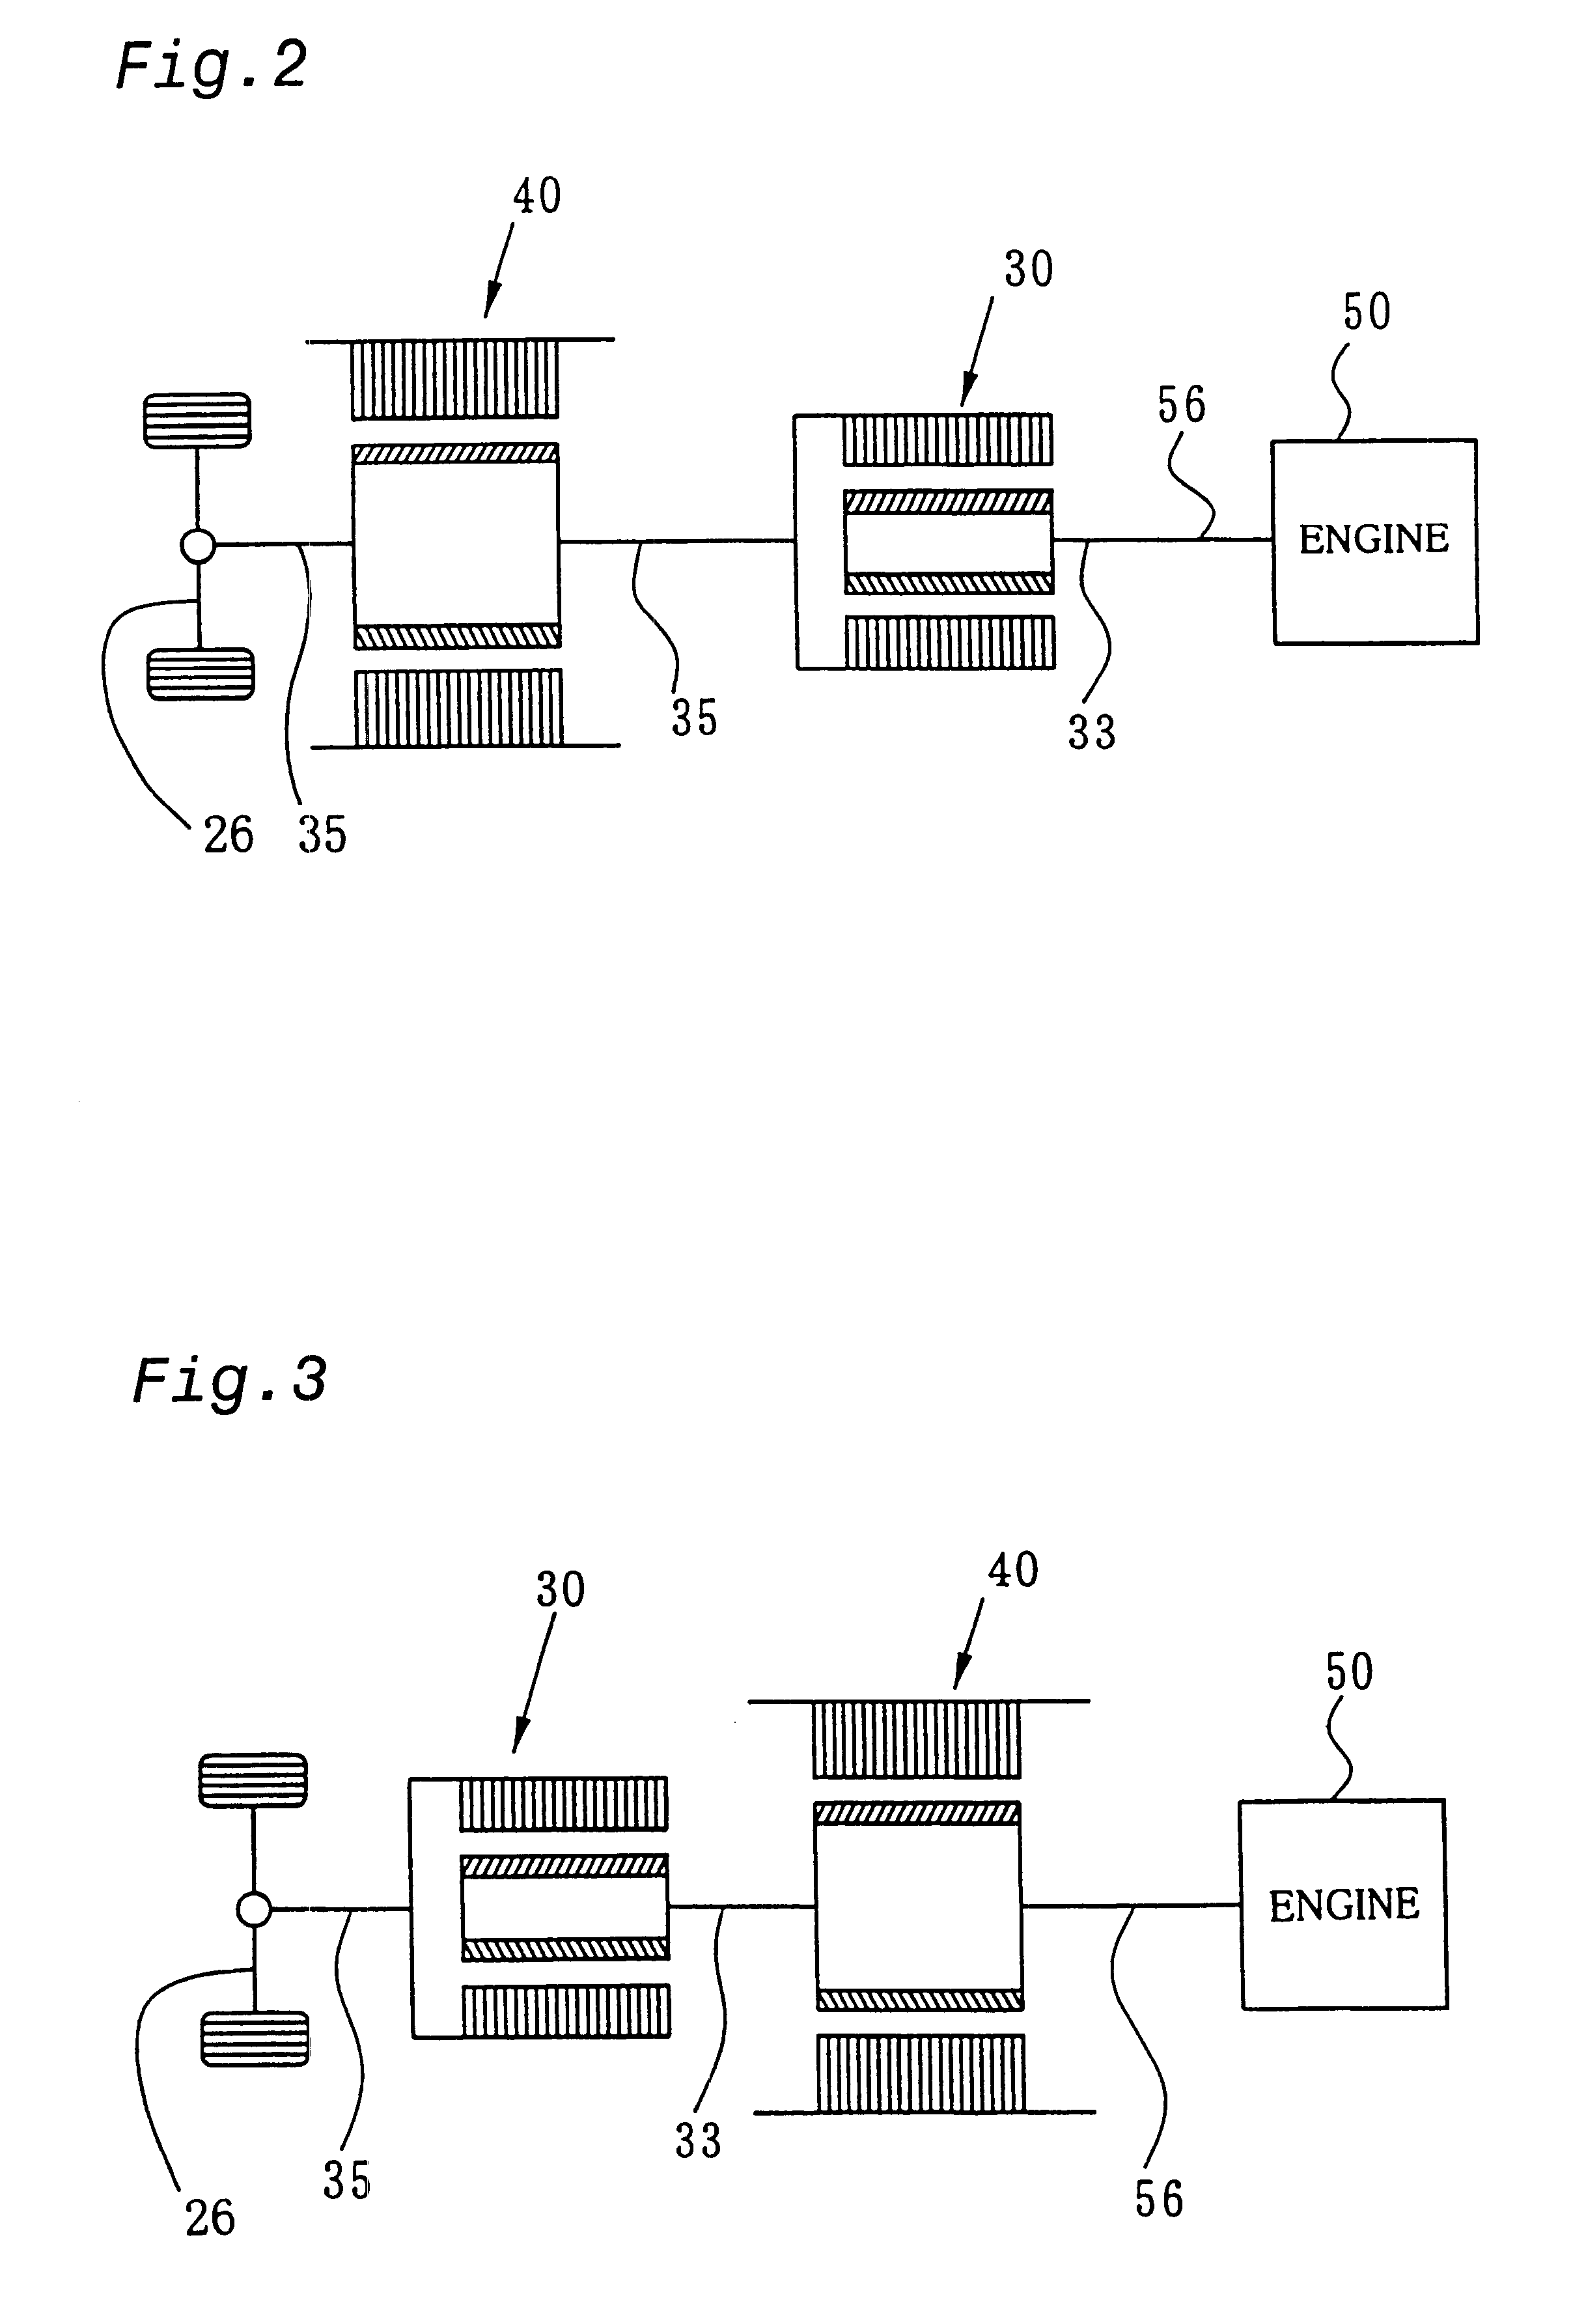 Power output apparatus and method of controlling the same